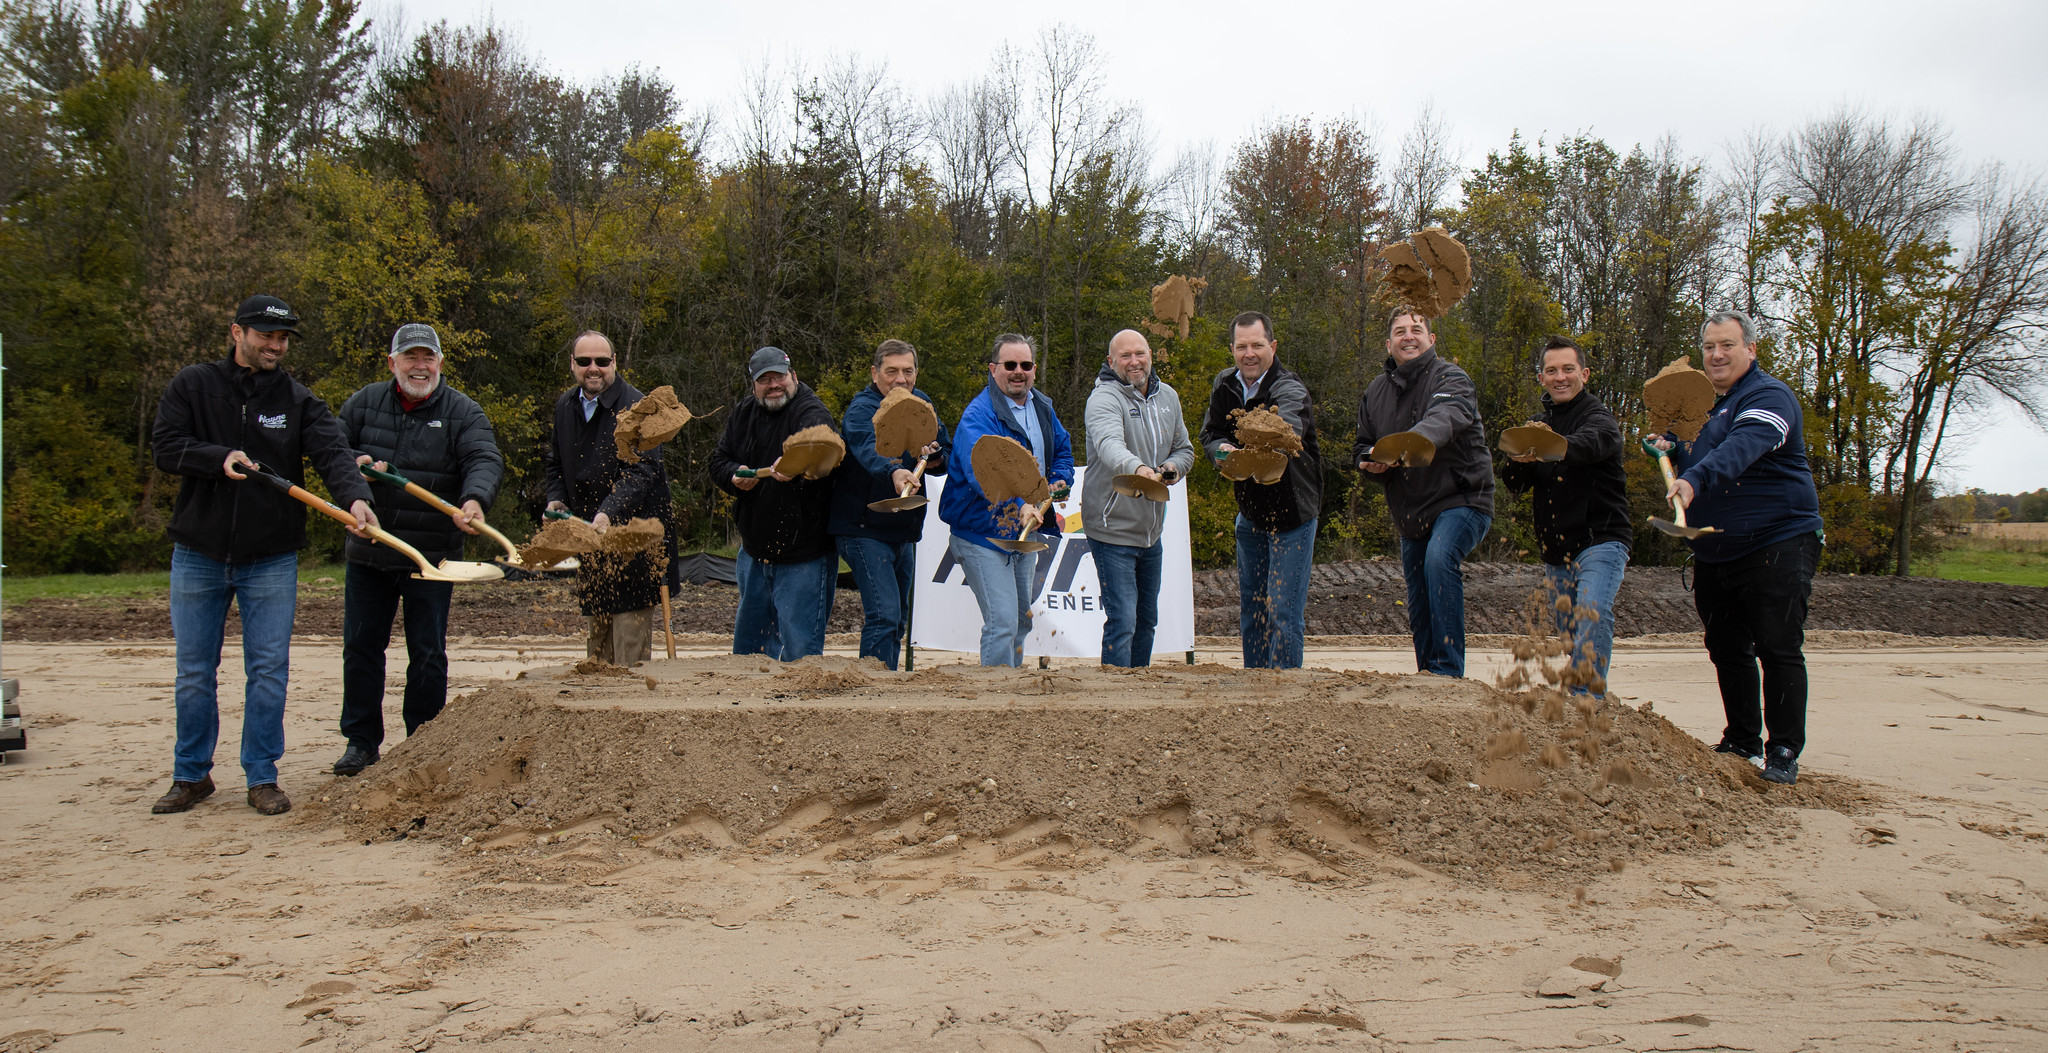 Officials participate in a groundbreaking ceremony for Wisconsin's first commercial facility to convert dairy farm waste into renewable energy.